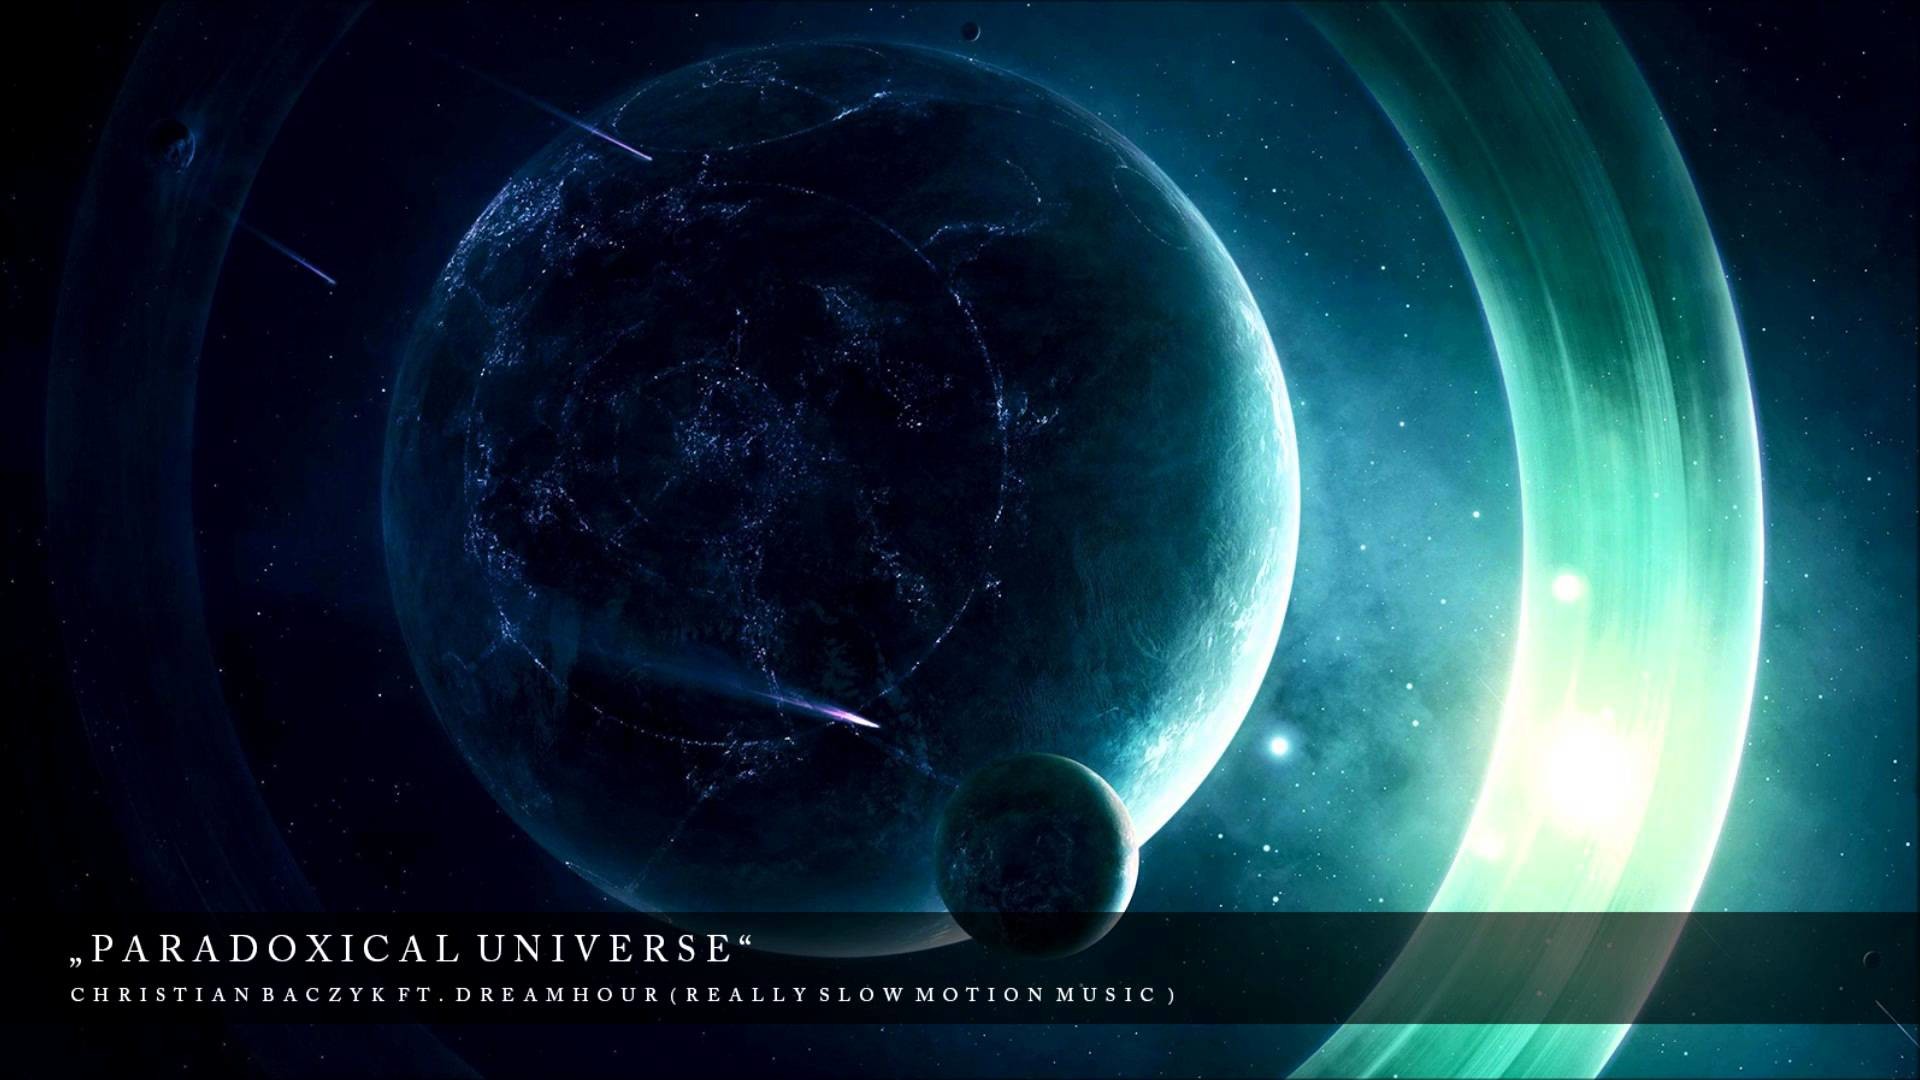 Really Slow Motion Music Christian Baczyk Ft. Dreamhour – Paradoxical Universe – YouTube